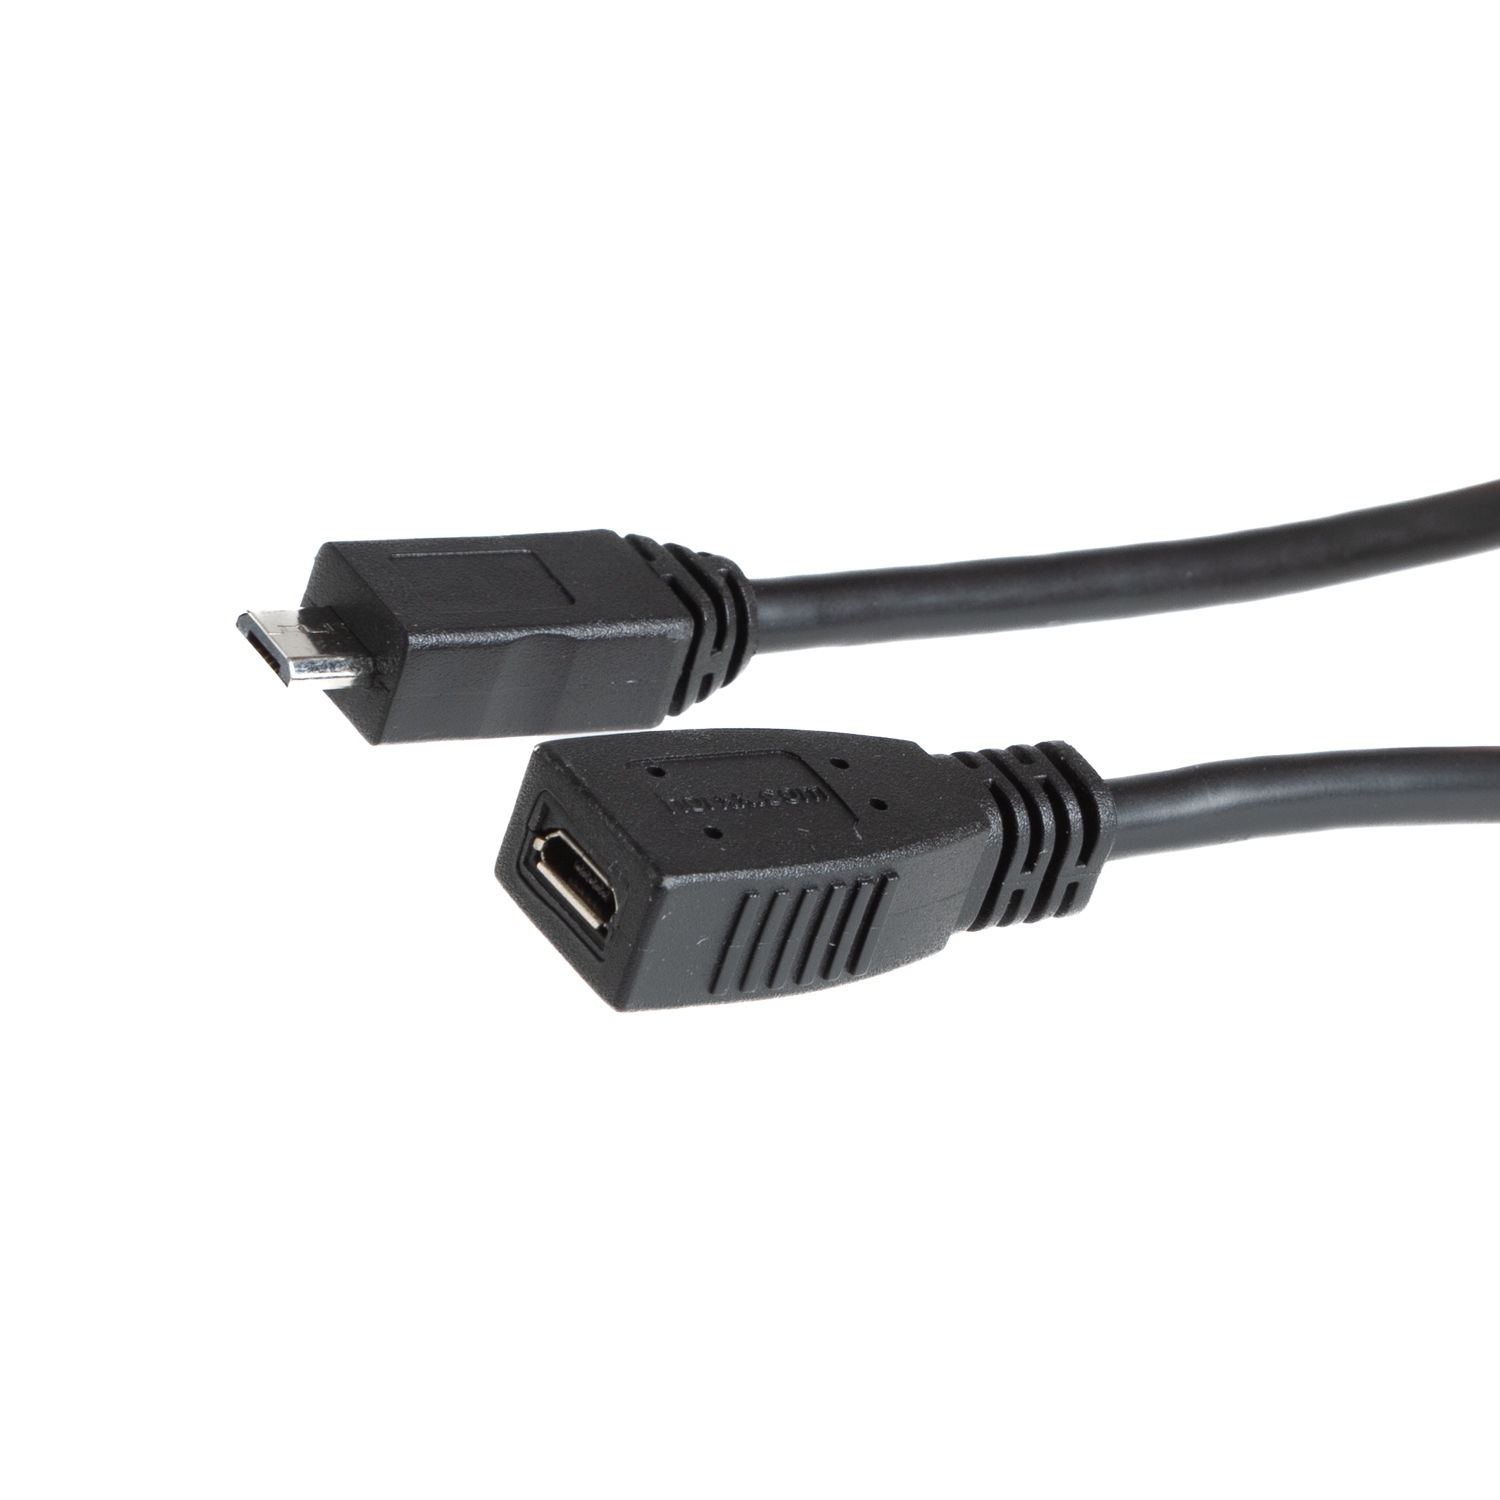 USB 2.0 MICRO B extension cable, ALL 5 PINS CONNECTED 1-to-1, 30cm